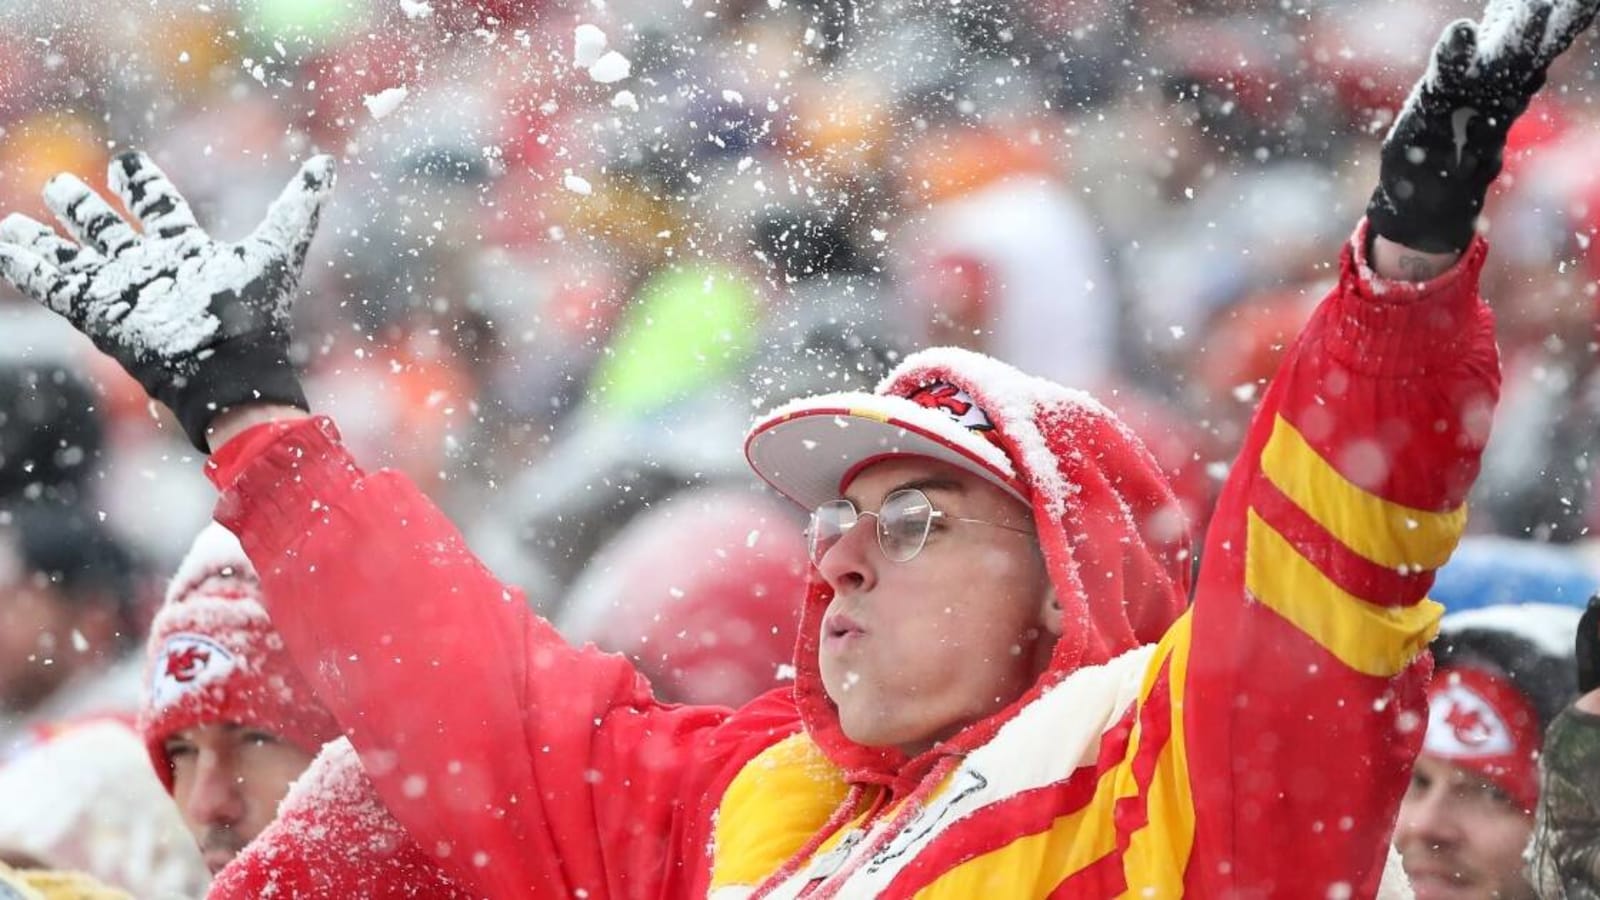 Dolphins-Chiefs Wild Card matchup expected to be one of the coldest NFL games on record